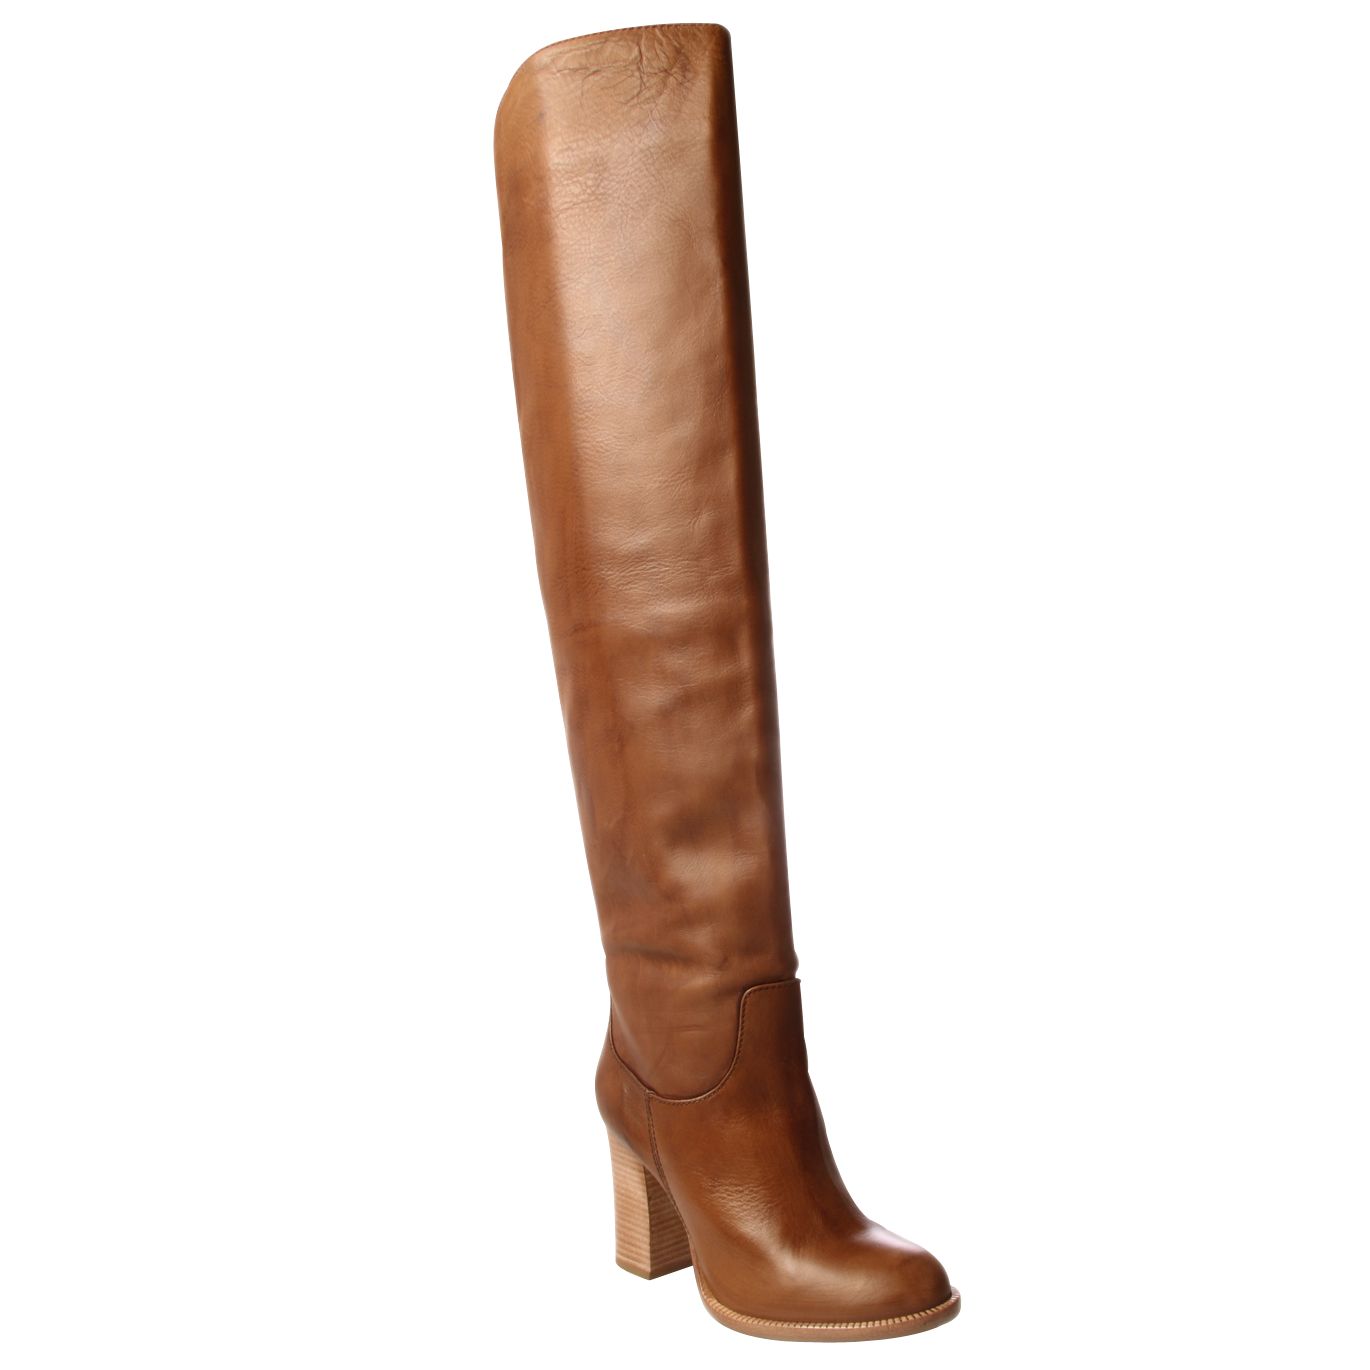 KG by Kurt Geiger Vivienne Over The Knee Boots, Tan at John Lewis